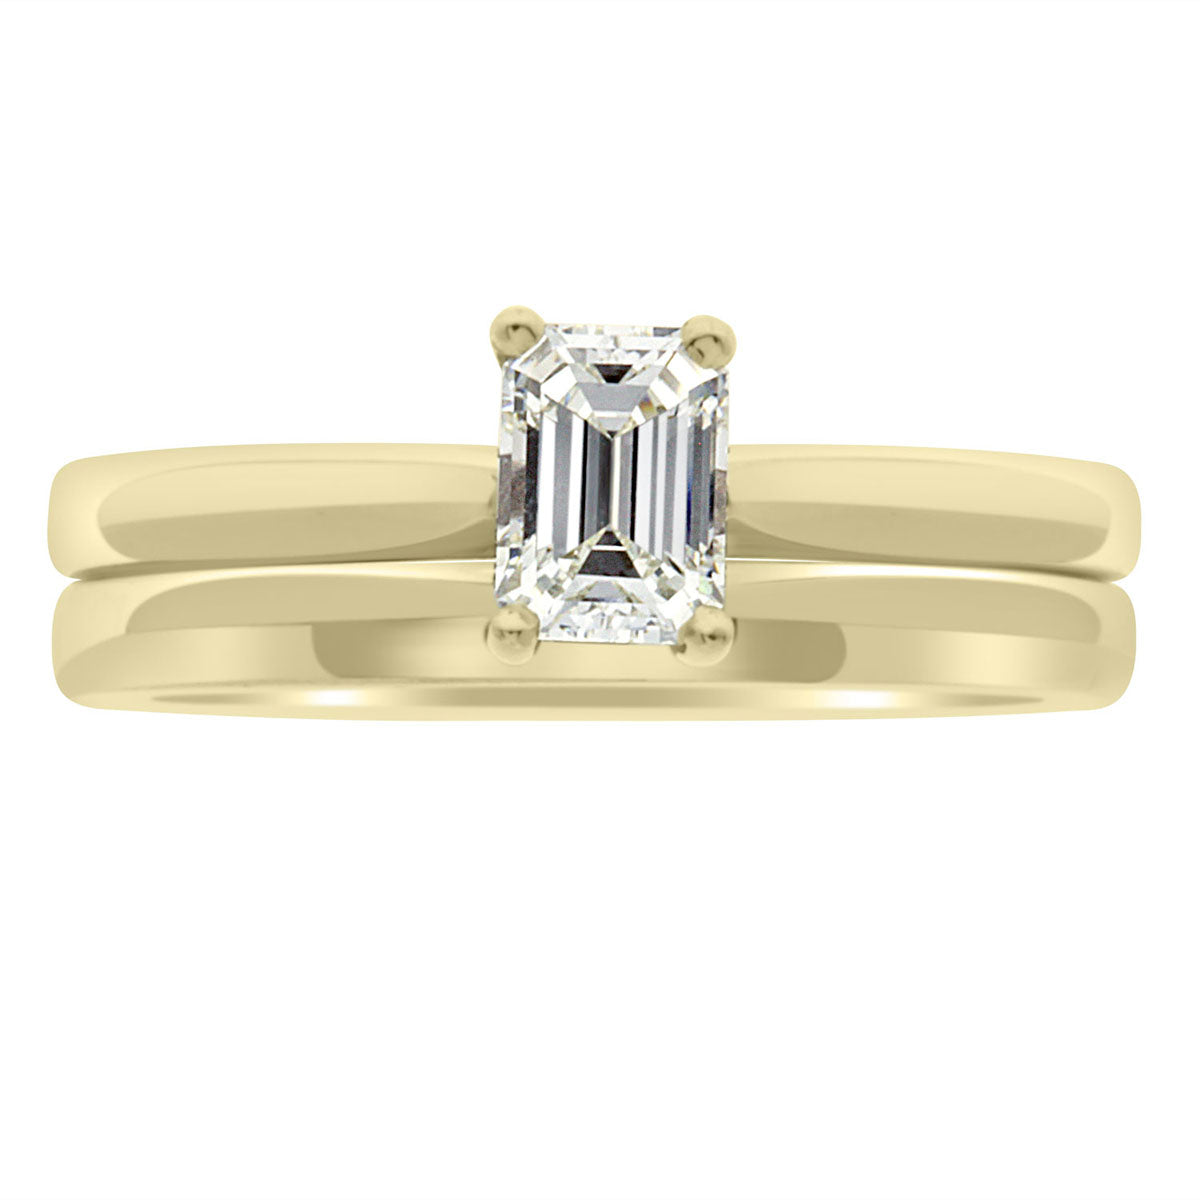 Emerald Cut Ring Solitaire Engagement Ring in yellow gold with a matching plain wedding ring